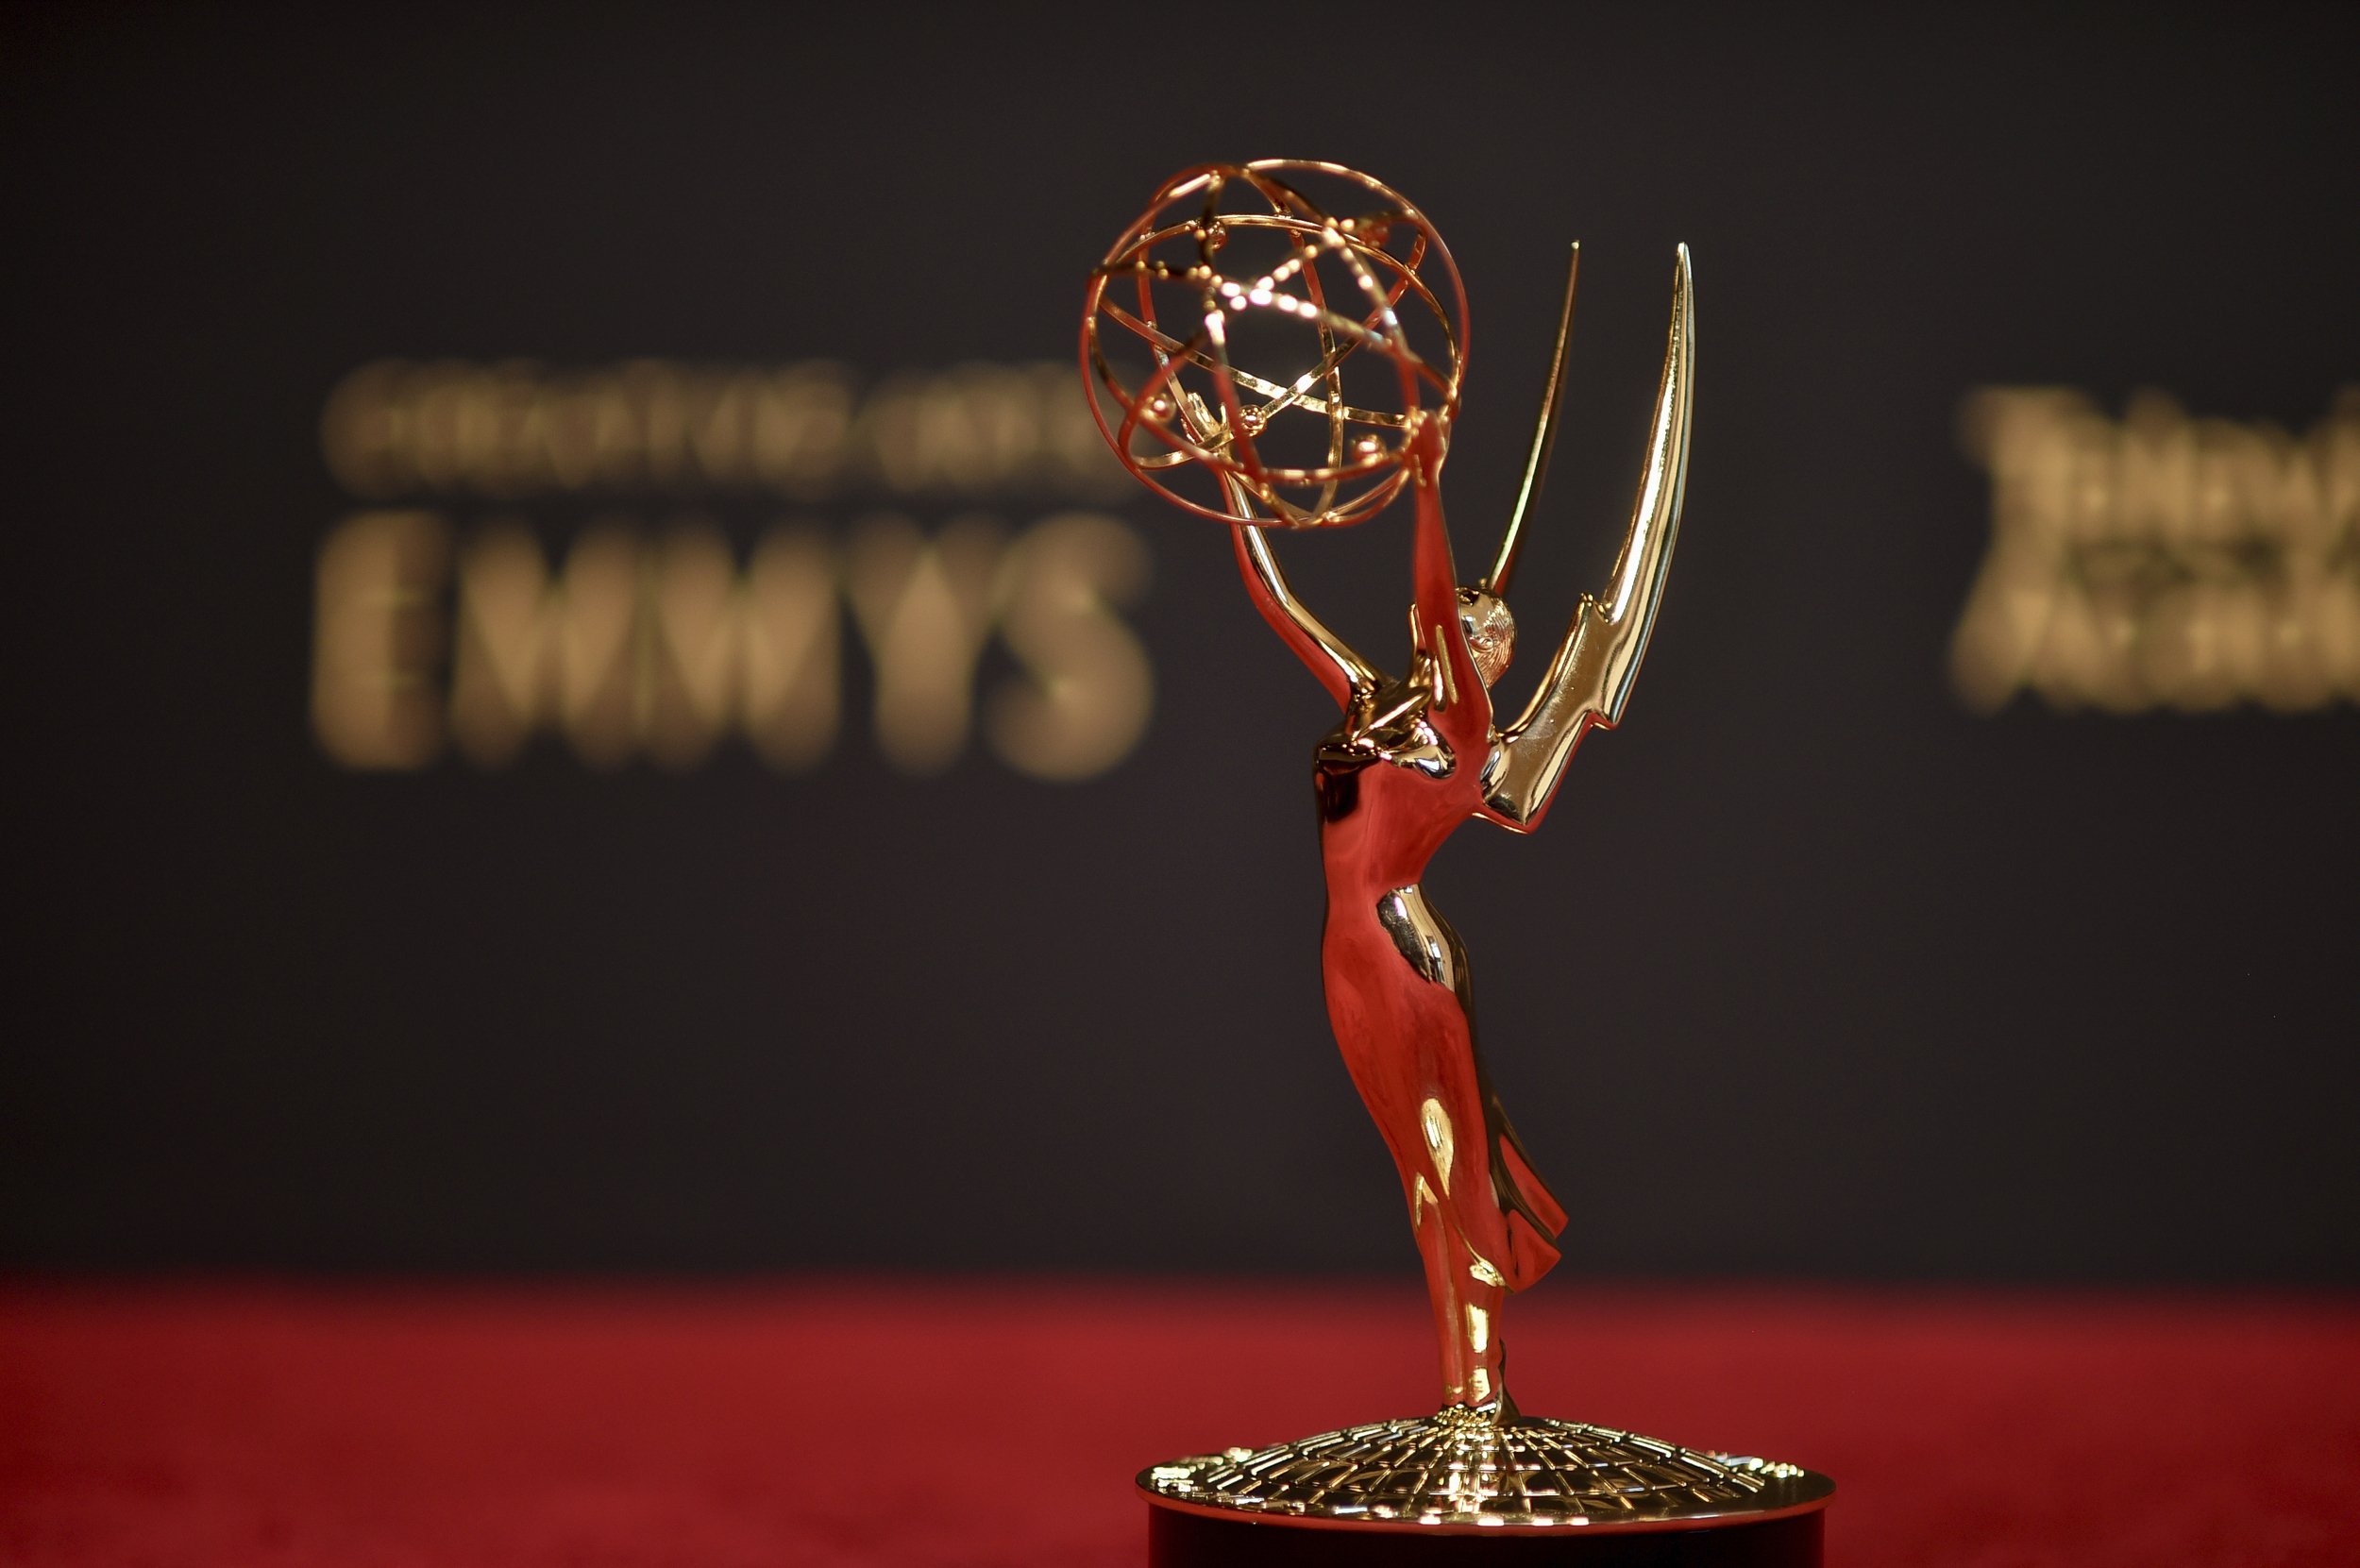 KING 5 continues winning streak with National Murrow Award and Regional Emmy Awards